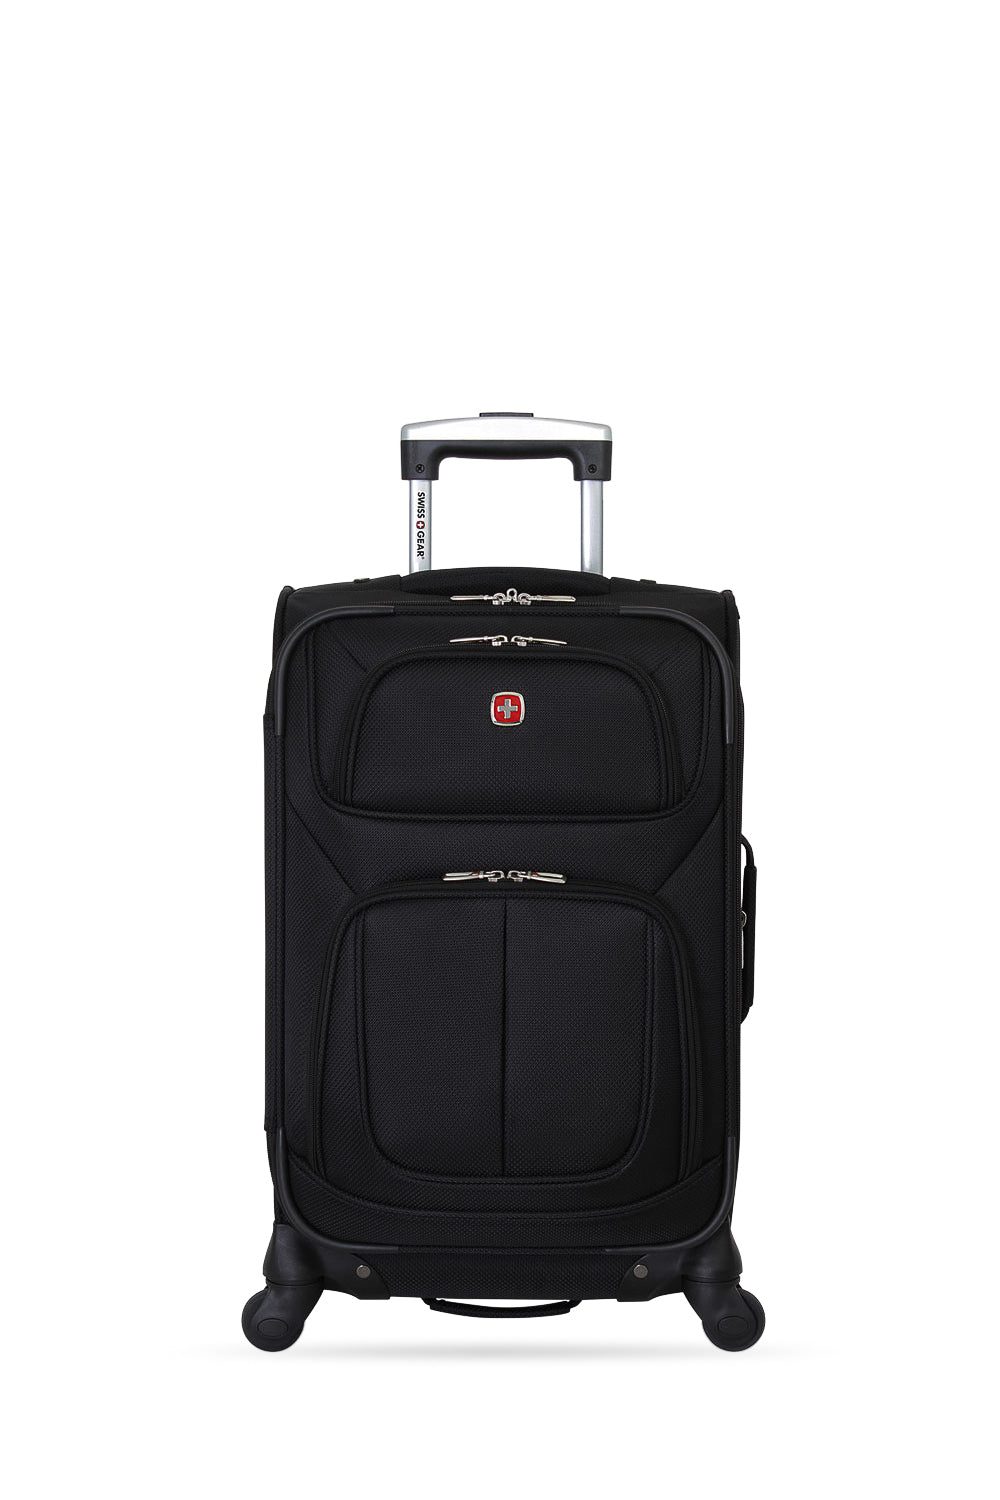 SwissGear 21" Carry On Spinner Suitcase